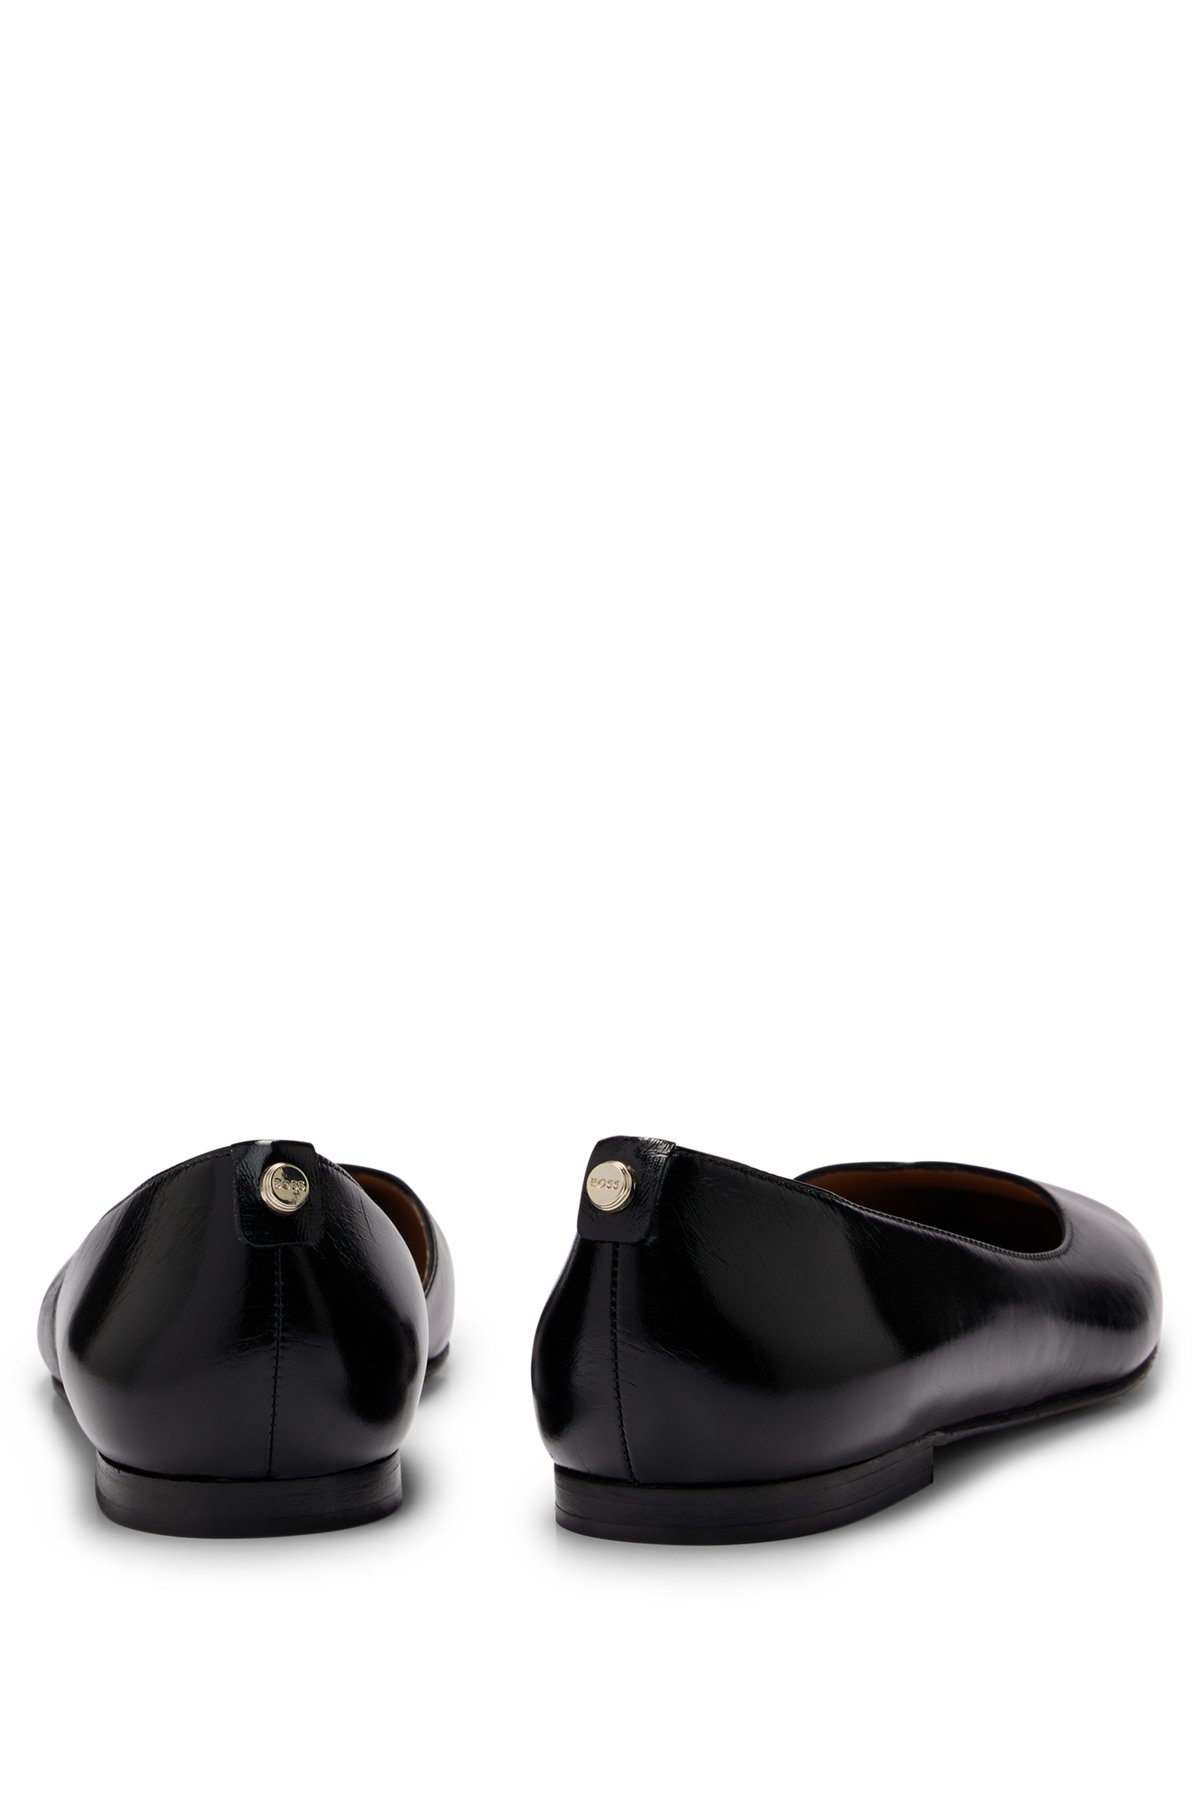 Ballerina flats in leather with asymmetric design, Black